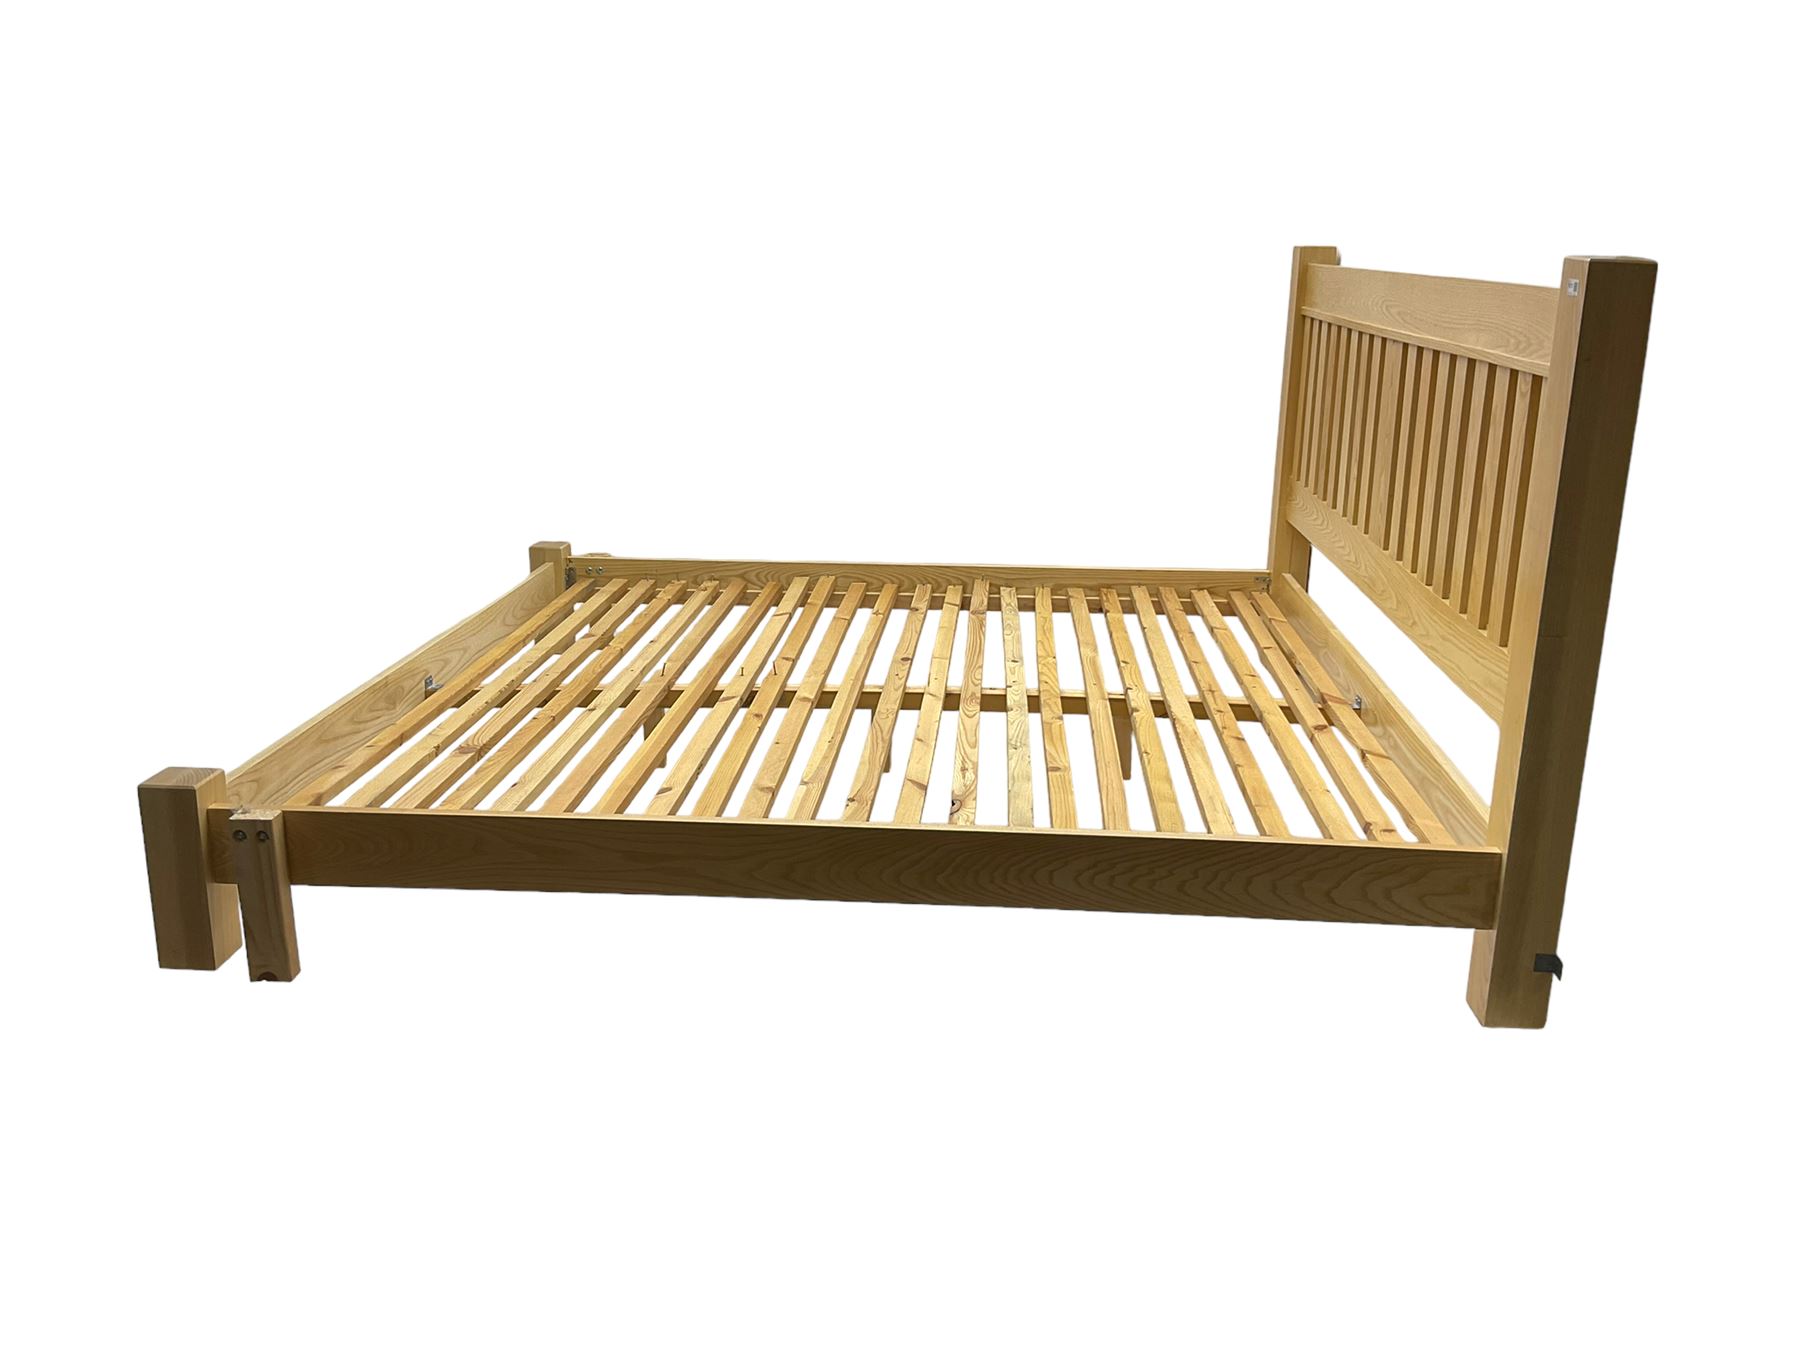 Light ash framed double bedstead (without mattress) - Image 4 of 4